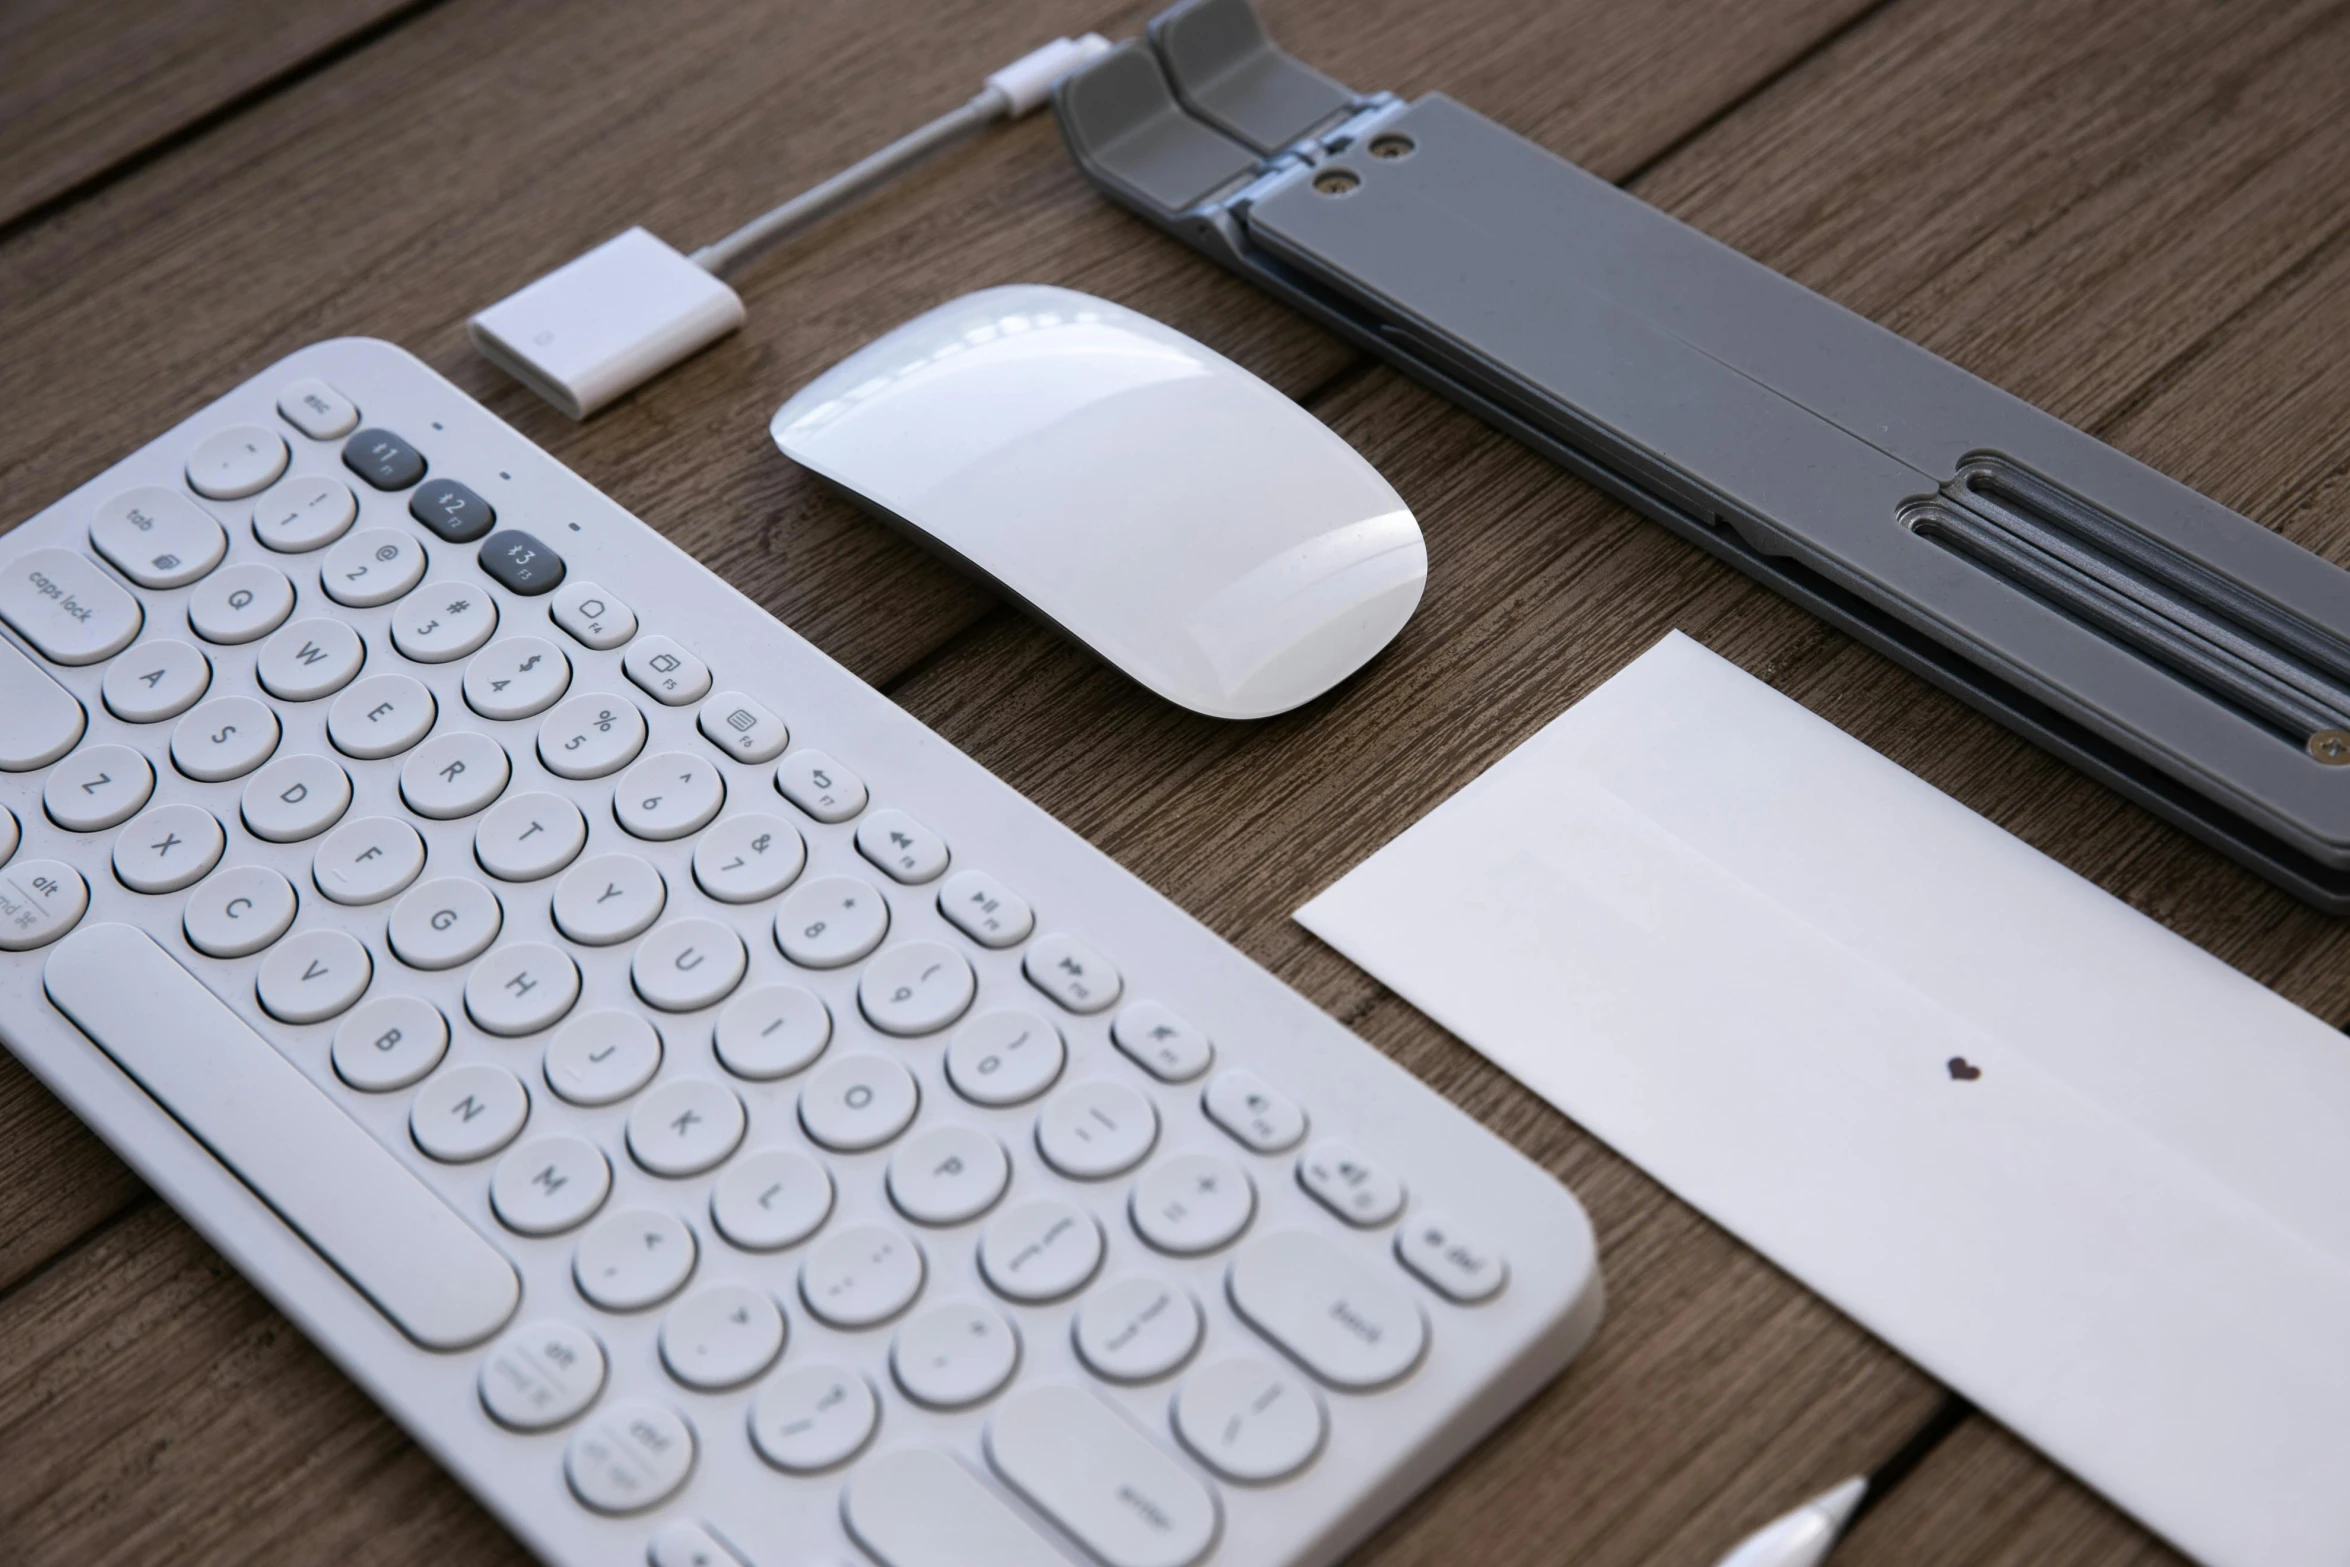 a keyboard and mouse sitting on top of a wooden table, various items, white and grey, slide show, brick